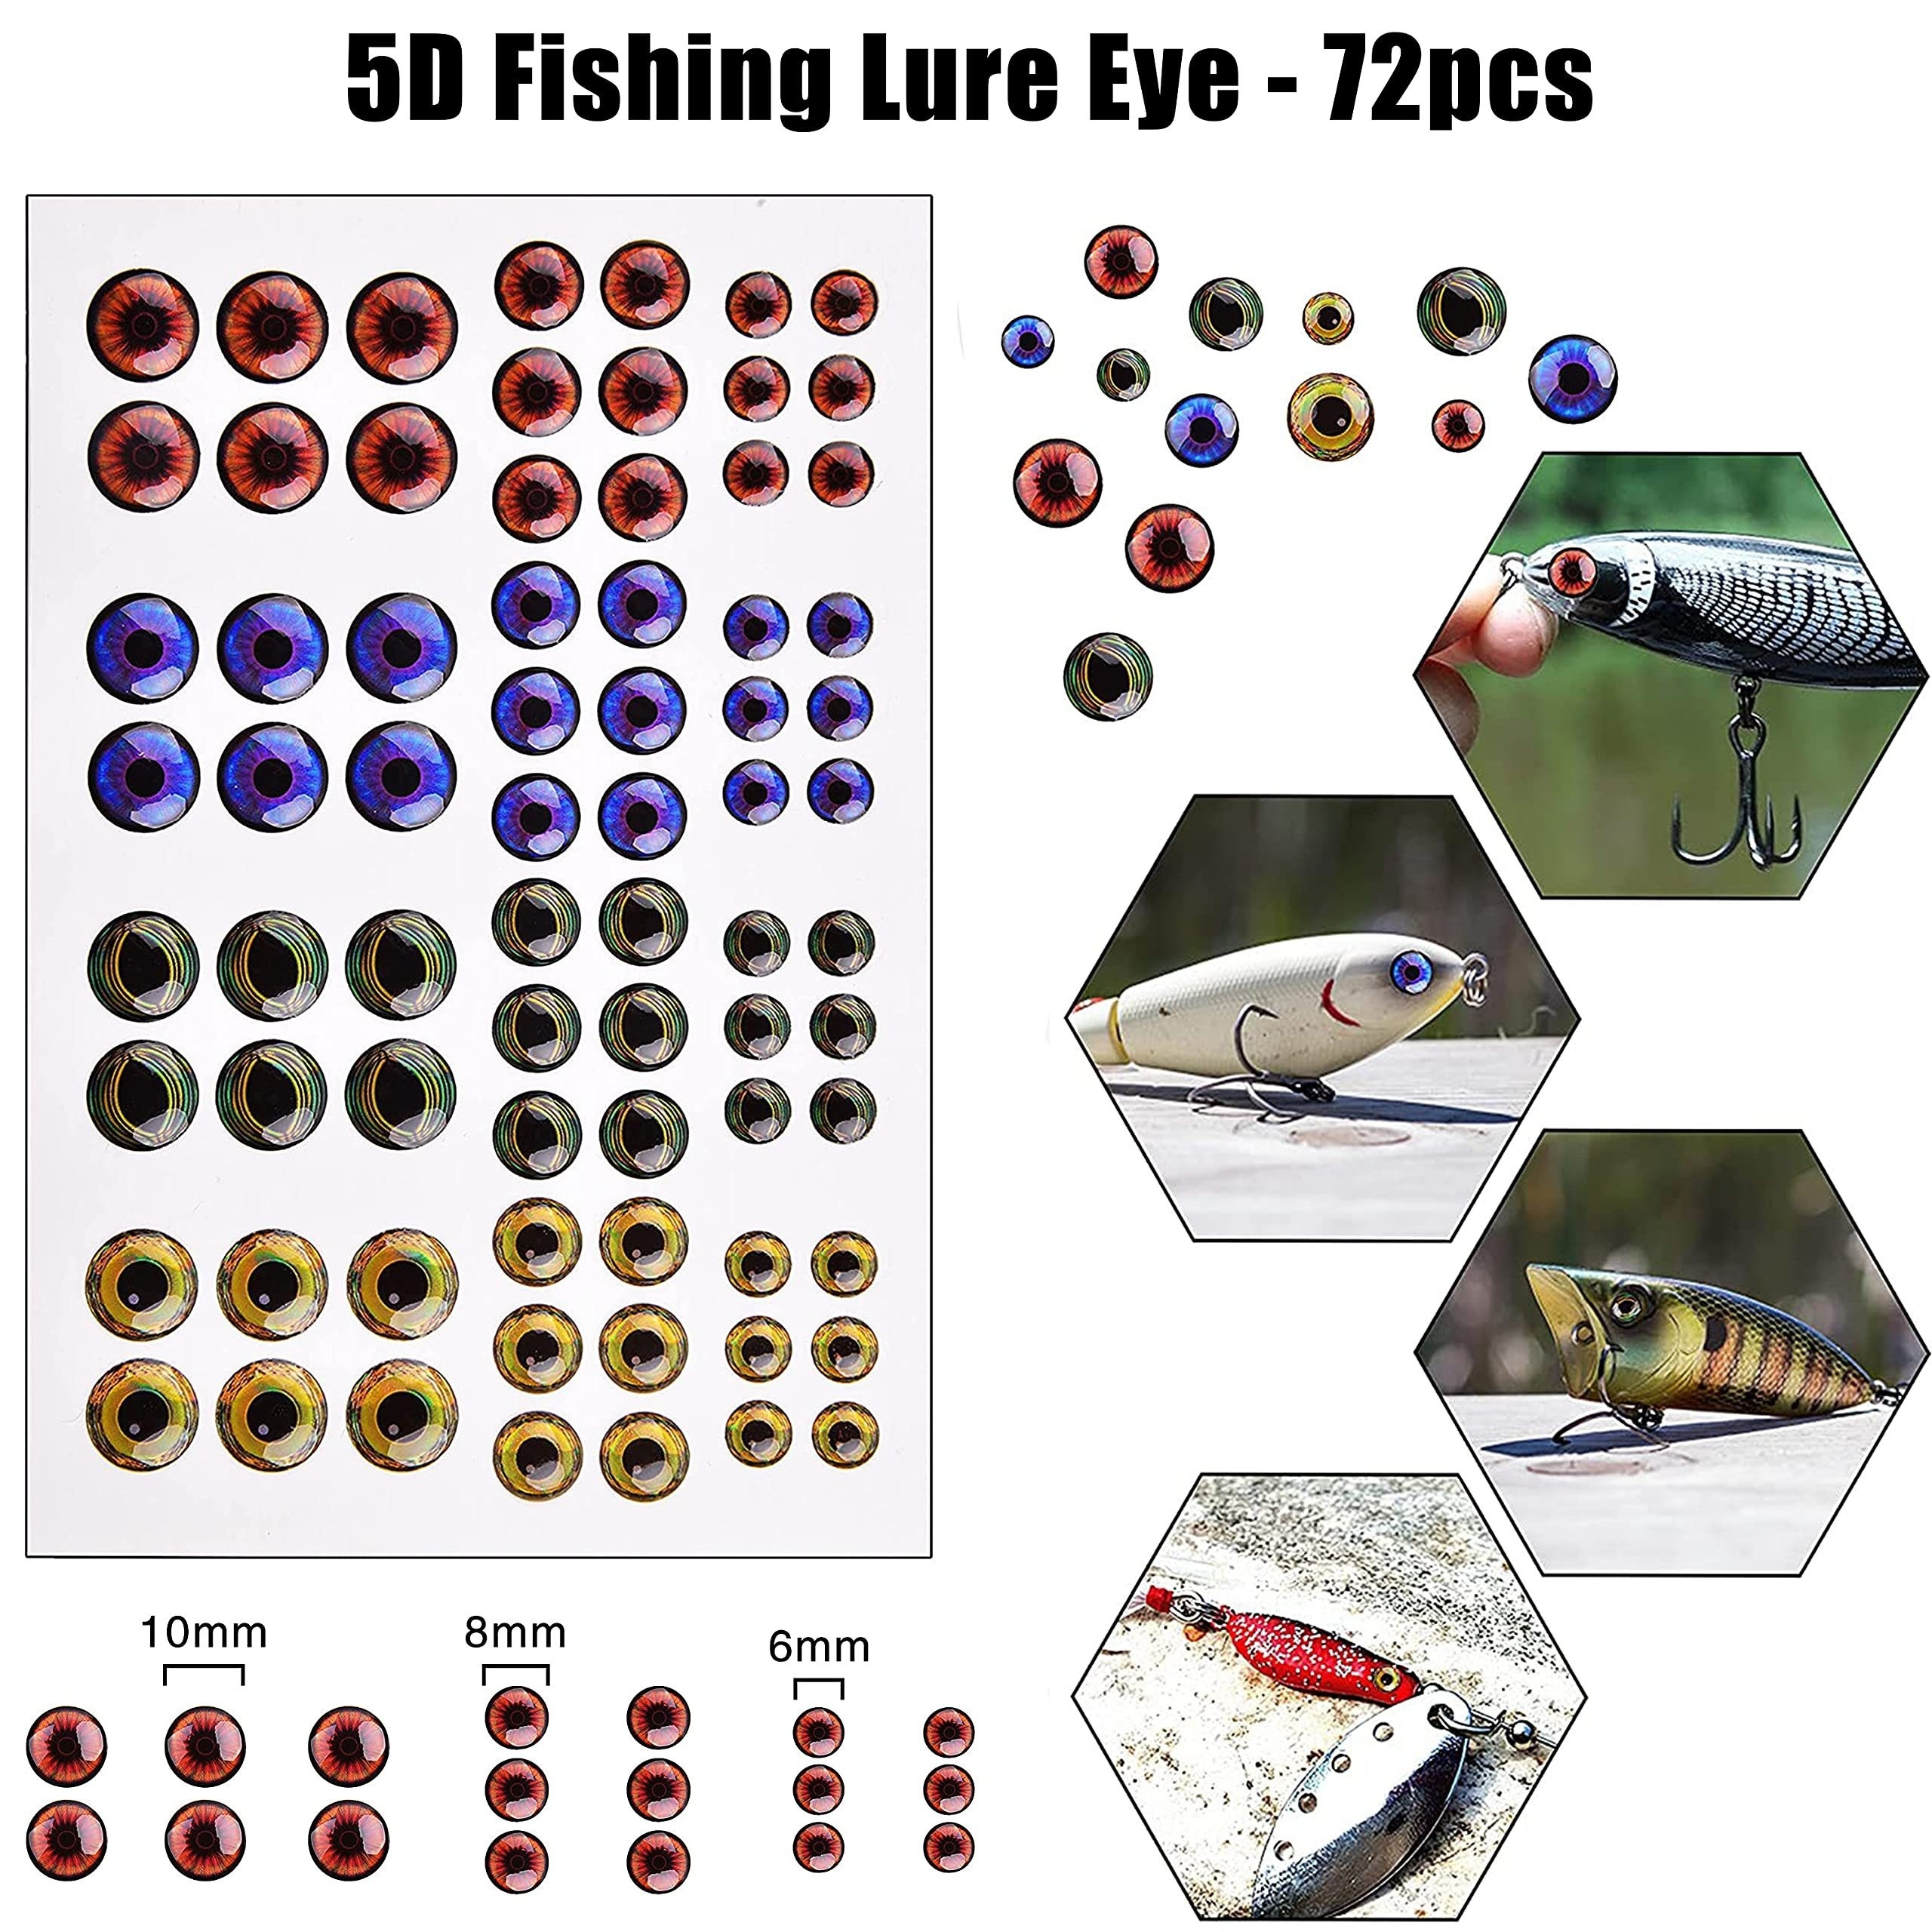 Maximucatch 4D Fishing Lure Eyes Fly Tying Material Fish Eyes